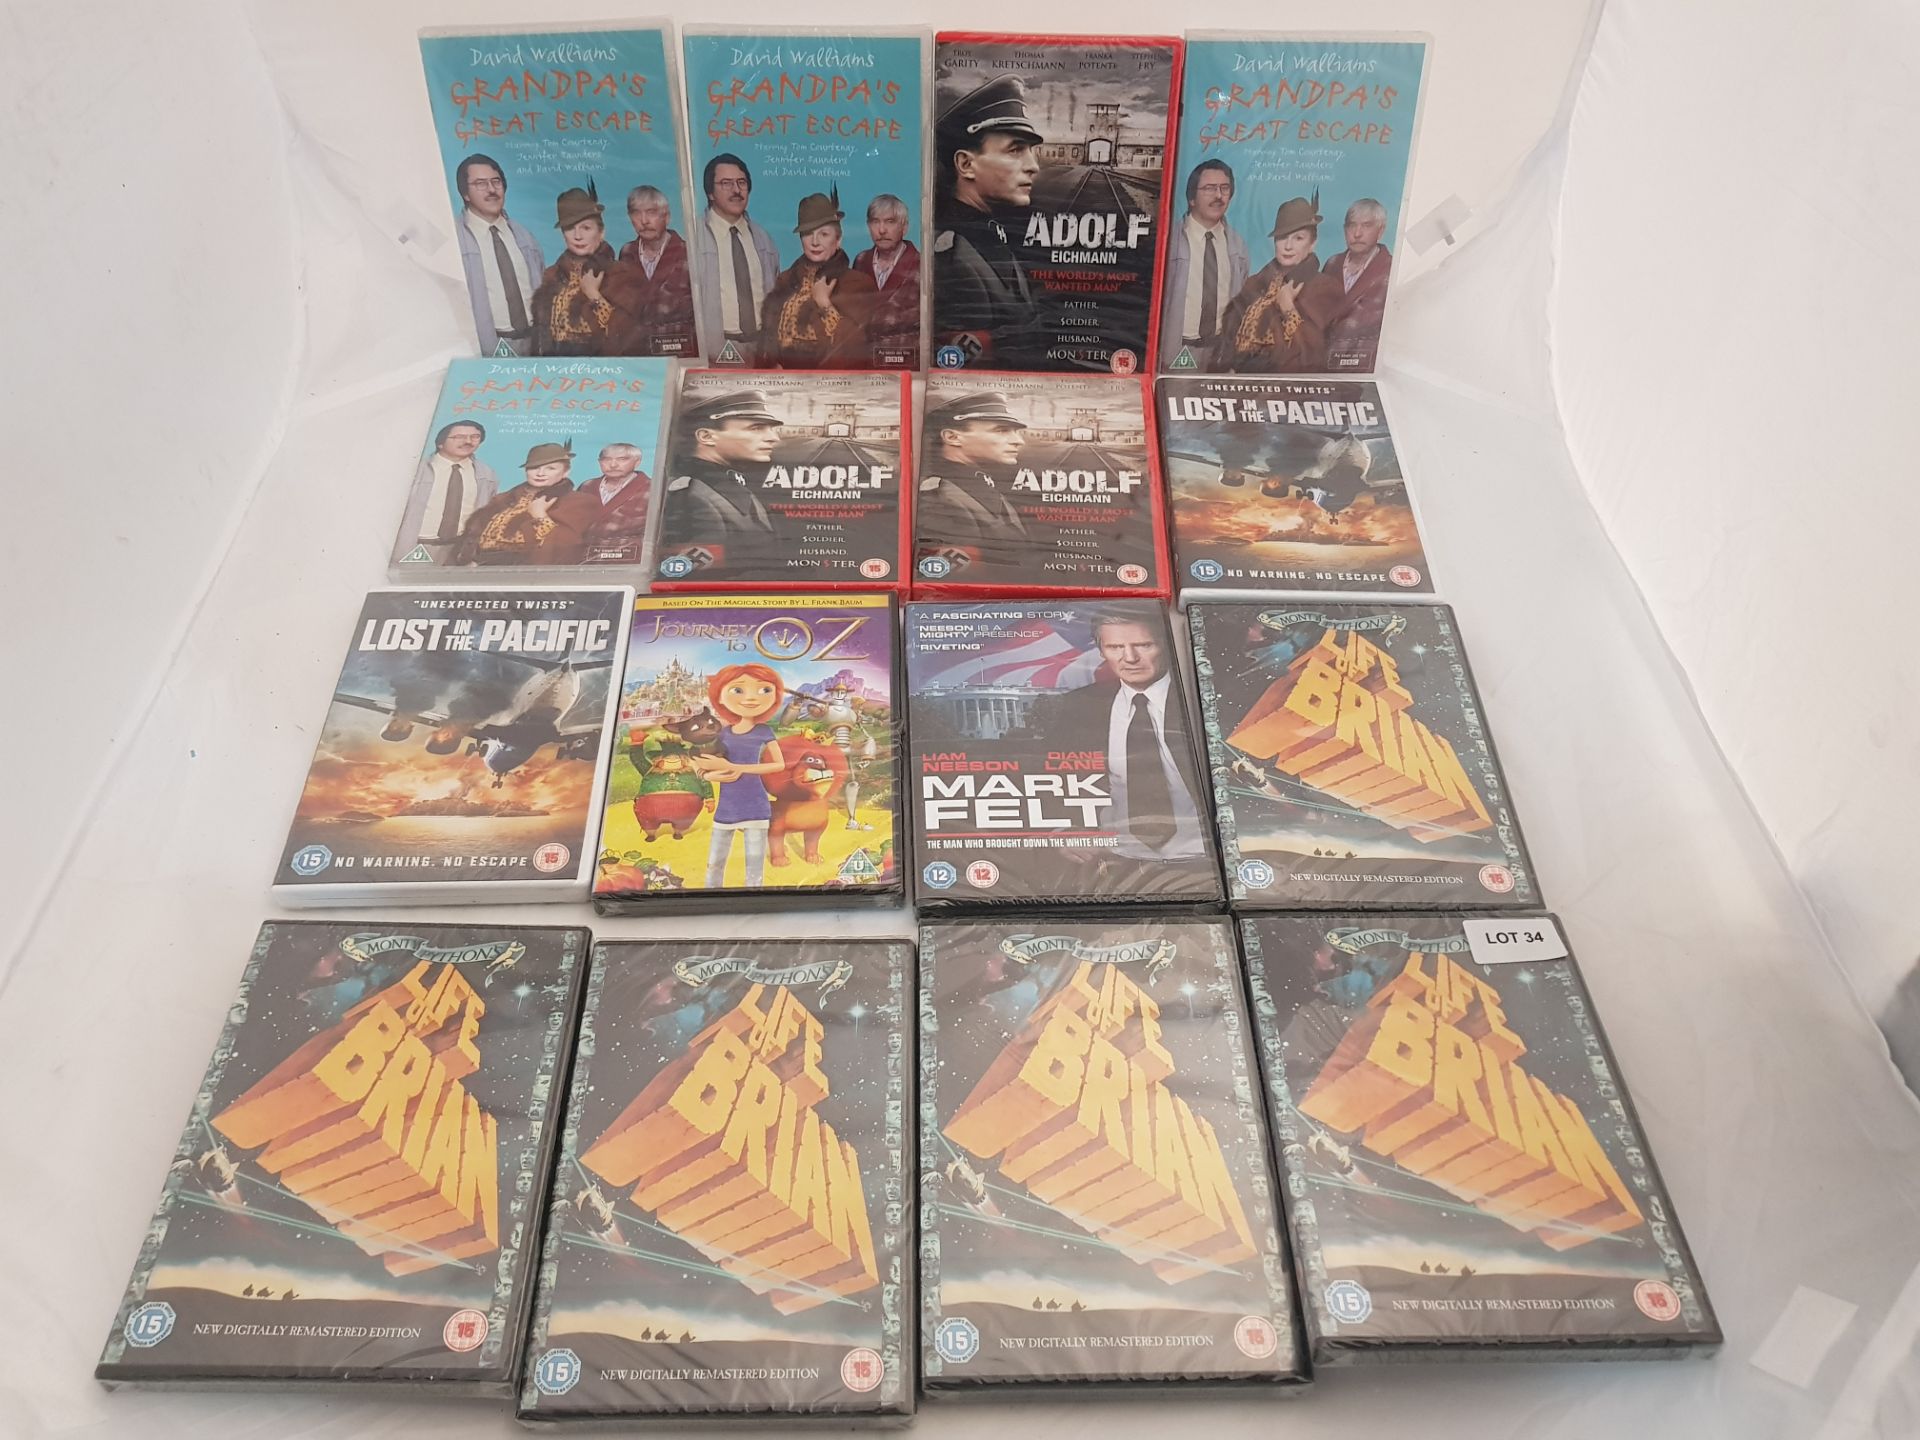 16 x Assorted DVDs to include Mark Felt, Life of Brian, Adolf, Lost in the Pacific, Grandpa's ...